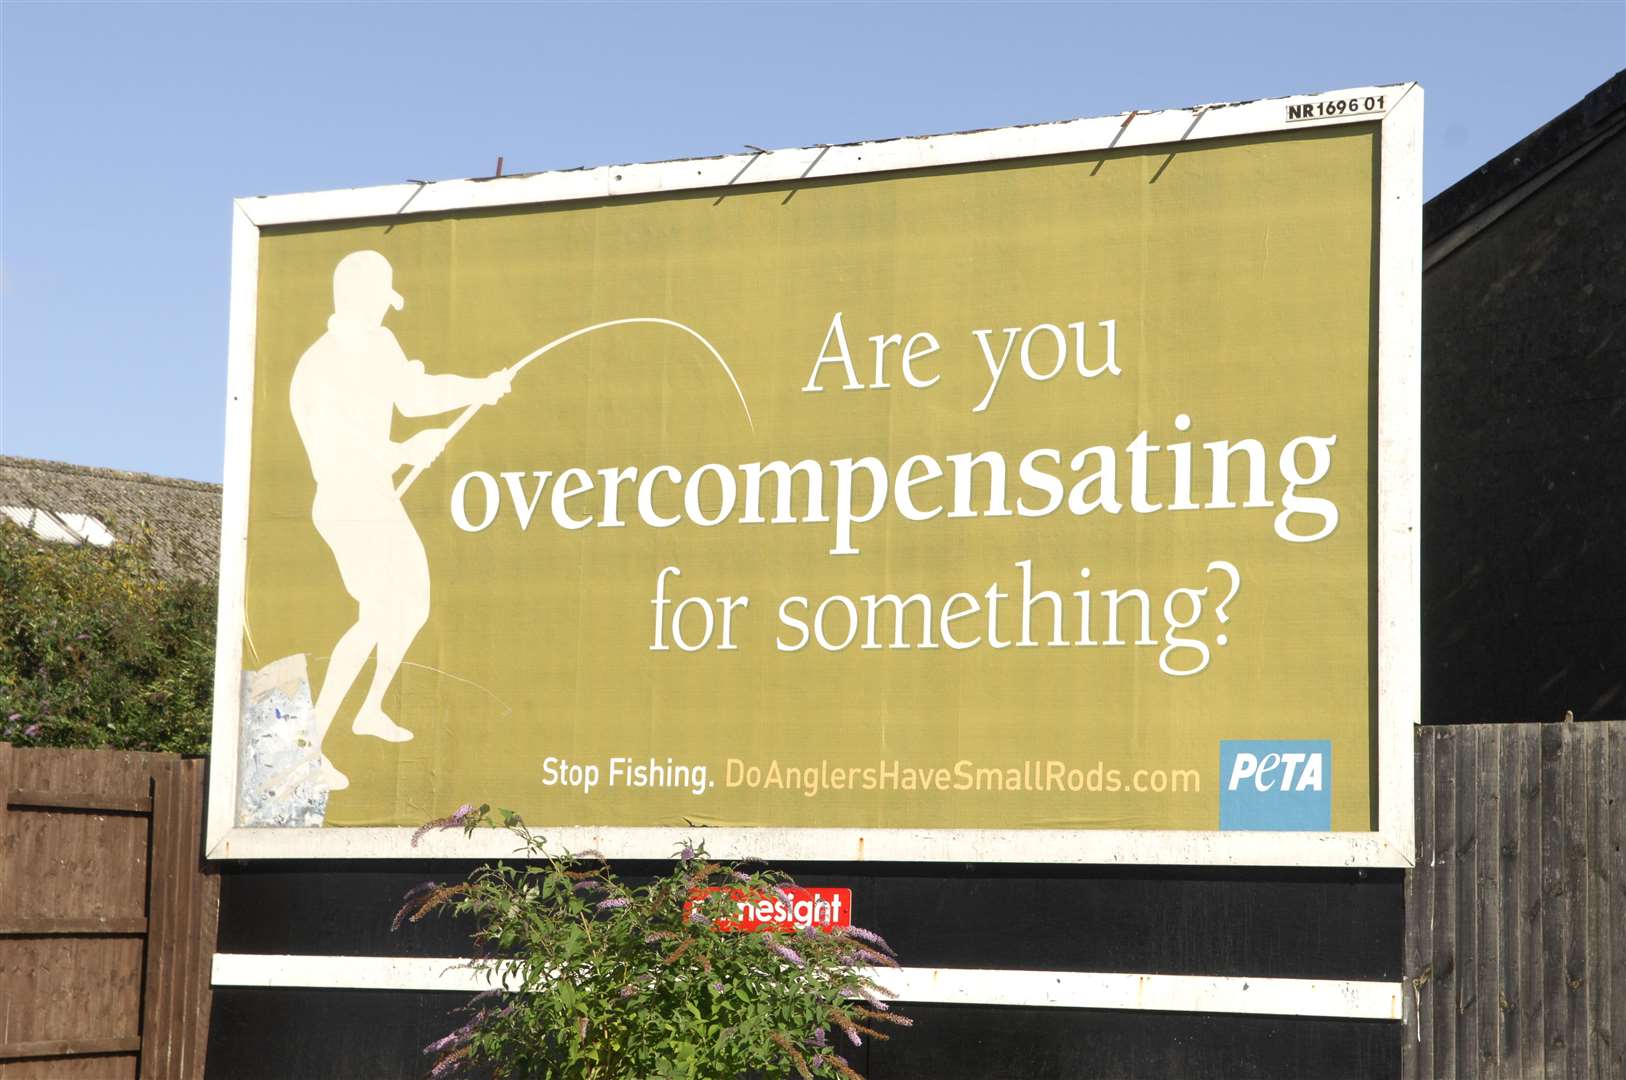 This billboard placed in Station Approach in 2010 by People for the Ethical Treatment of Animals drew complaints from the mourning anglers